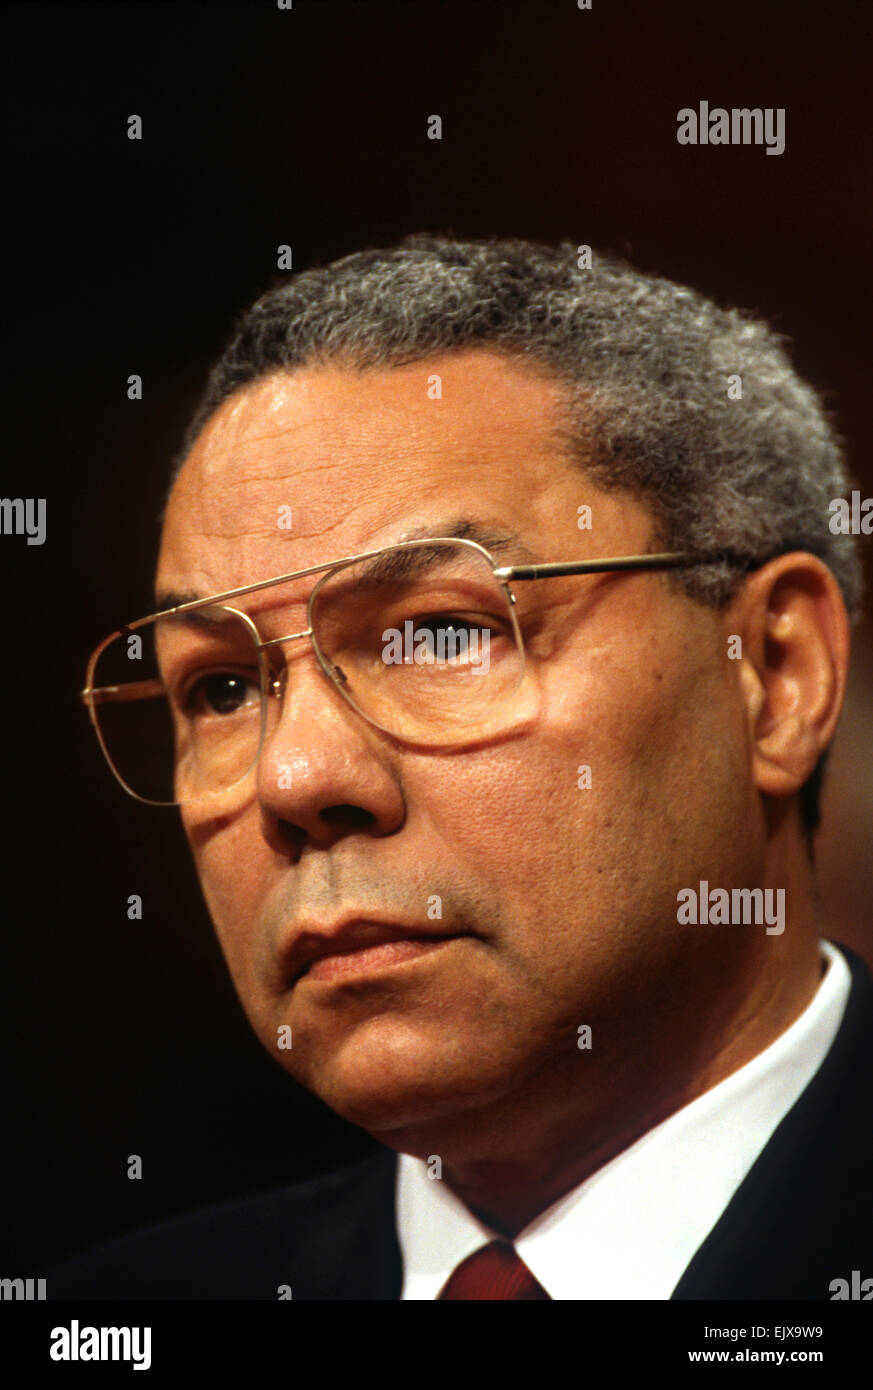 WASHINGTON, DC, USA - 1997/04/17: Ret. Gen. Colin Powell testifies on Gulf War syndrome and issues with veterans who served in the Persian Gulf War at the U.S. Senate Committee on Veterans' Affairs on Capitol Hill April 17, 1997 in Washington, DC.    (Photo by Richard Ellis) Stock Photo